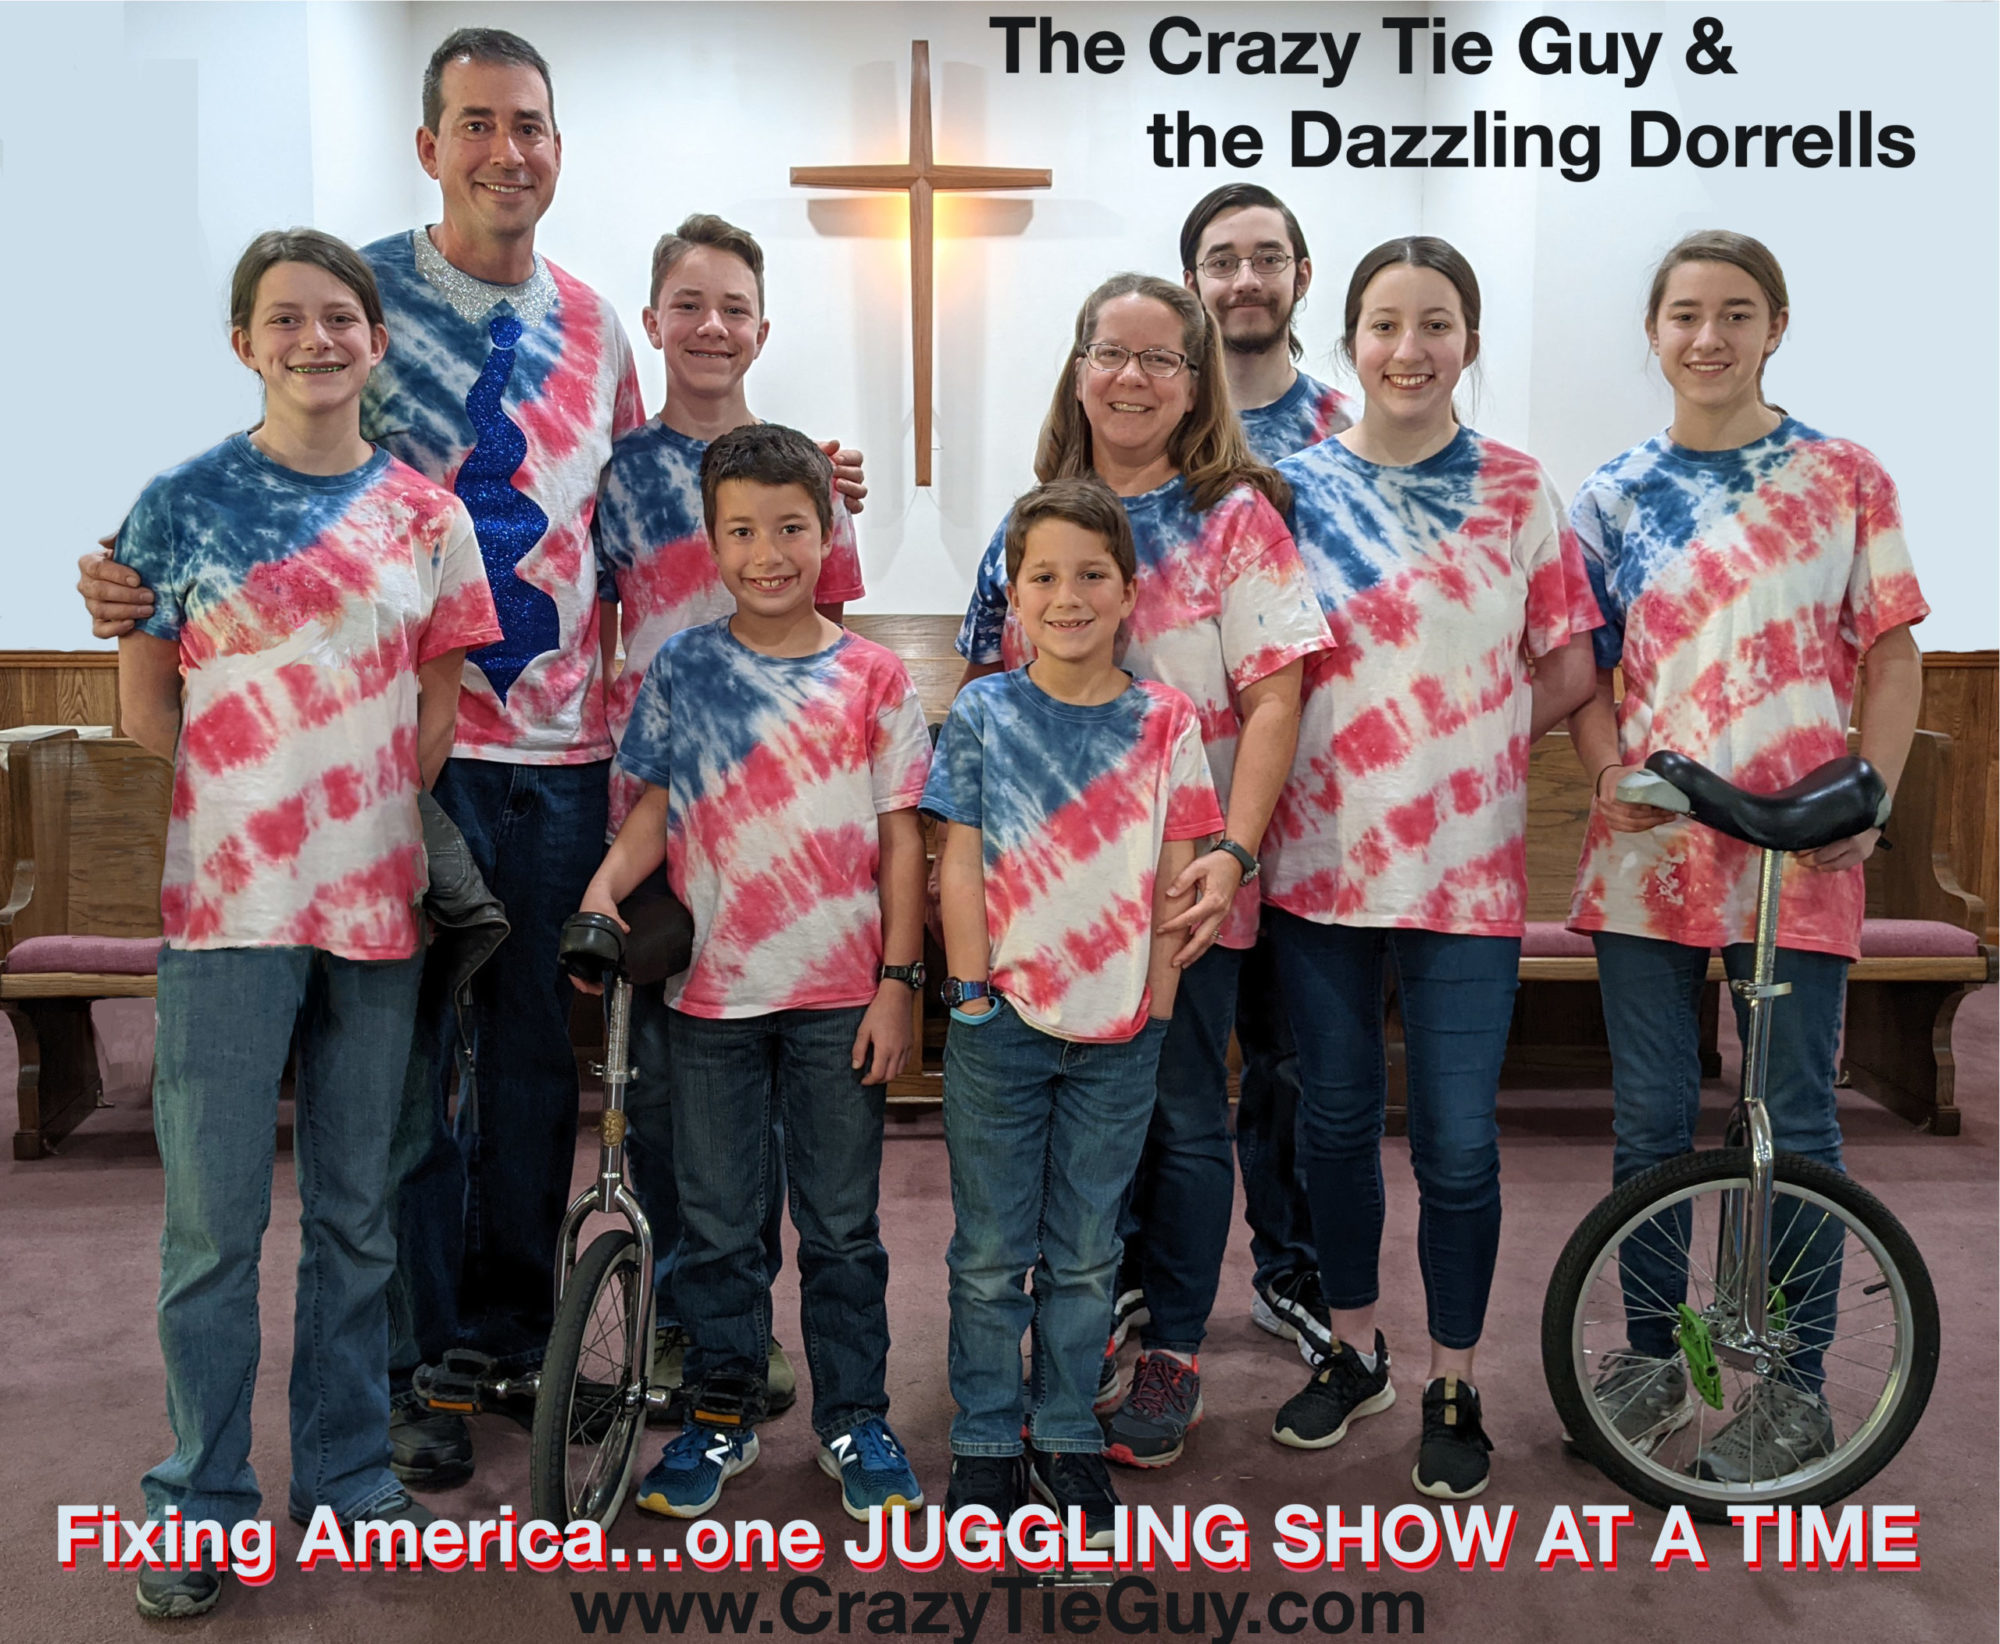 The Crazy Tie Guy and Dazzlin' Dorrell Family